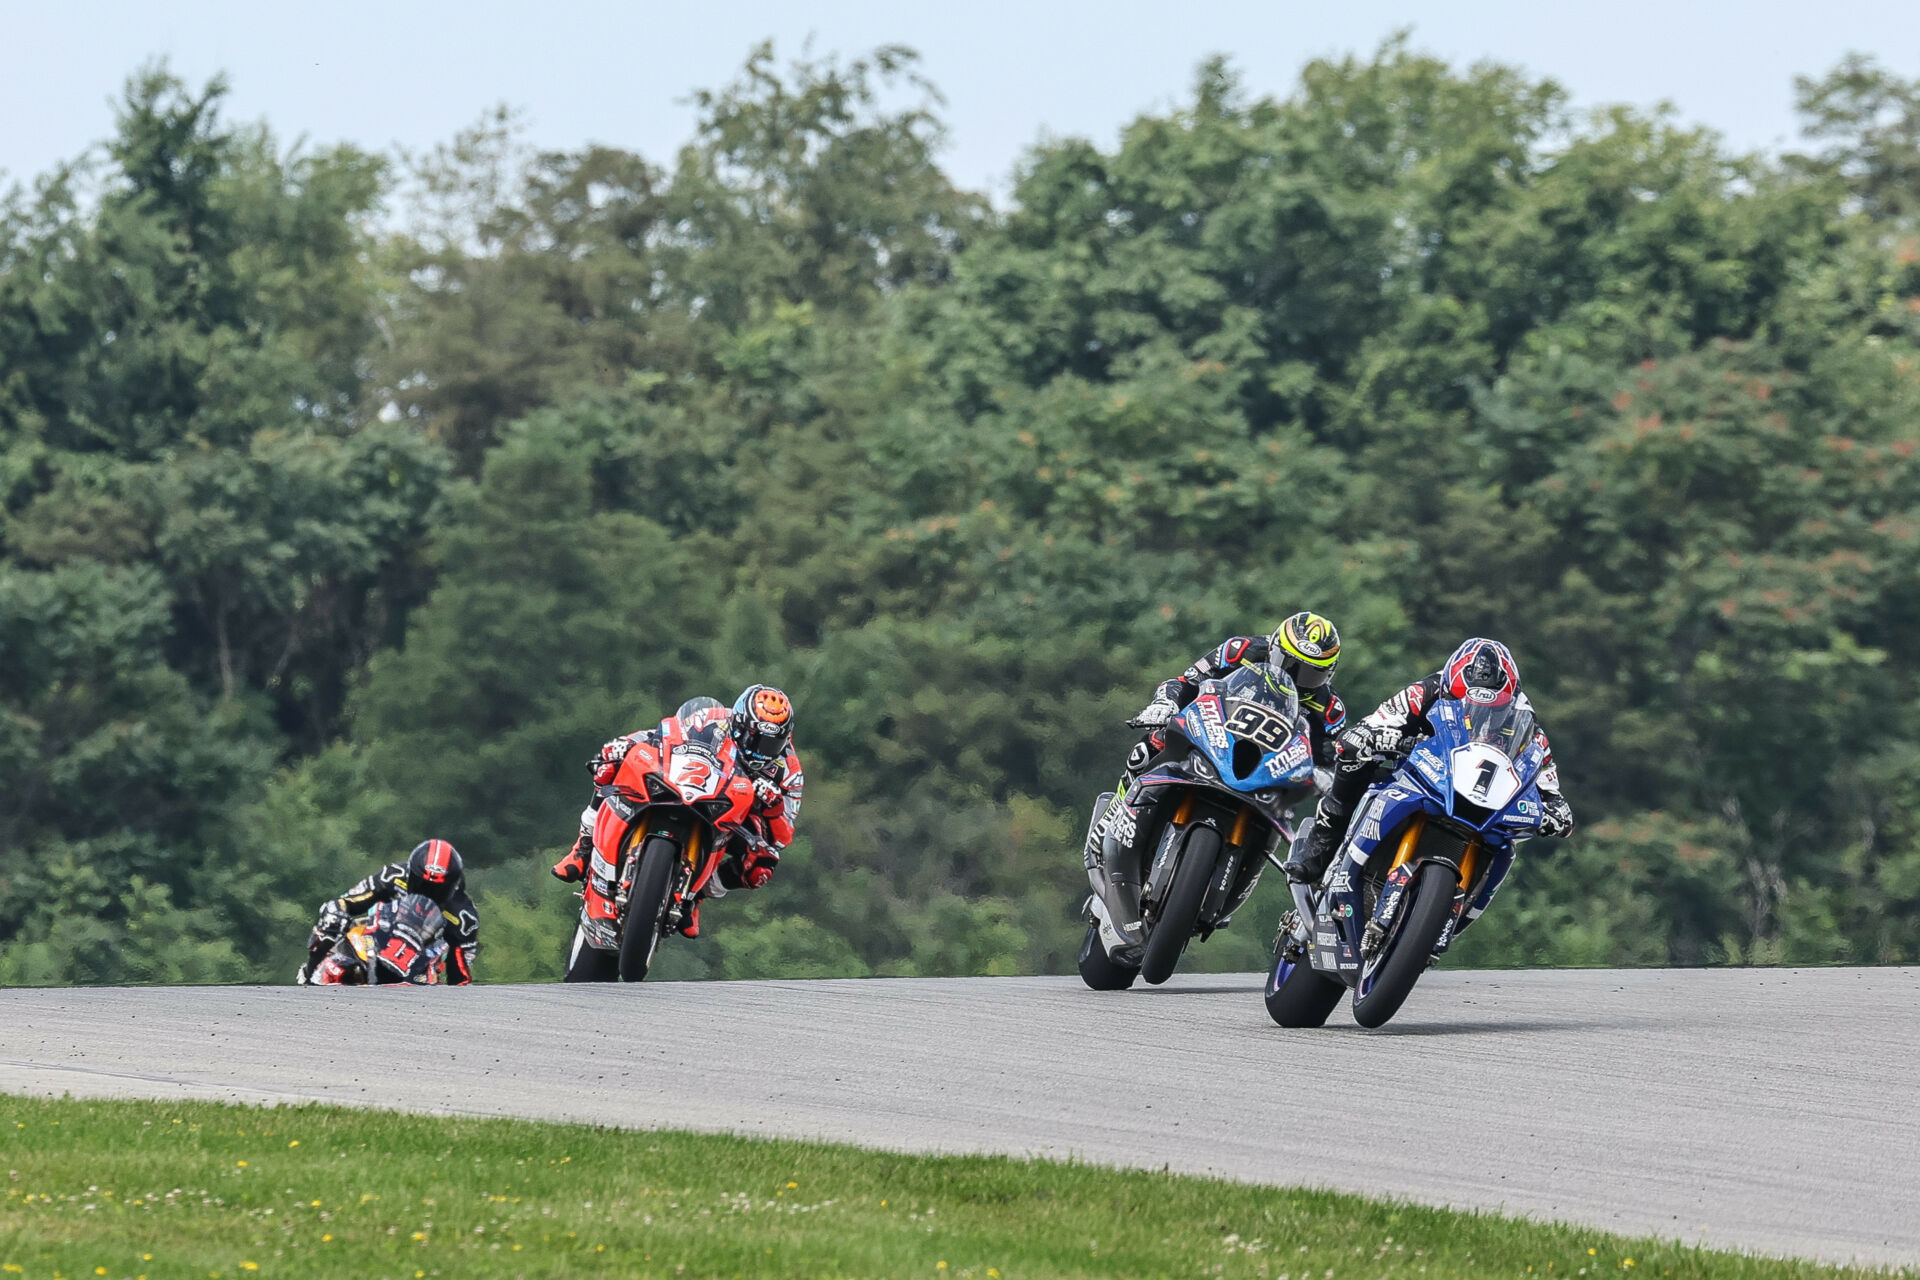 The battle for victory came down to Gagne (1) vs. Jacobsen (99) with Gagne emerging victorious. Herrin (2), meanwhile, ended up third. Photo by Brian J. Nelson, courtesy MotoAmerica.